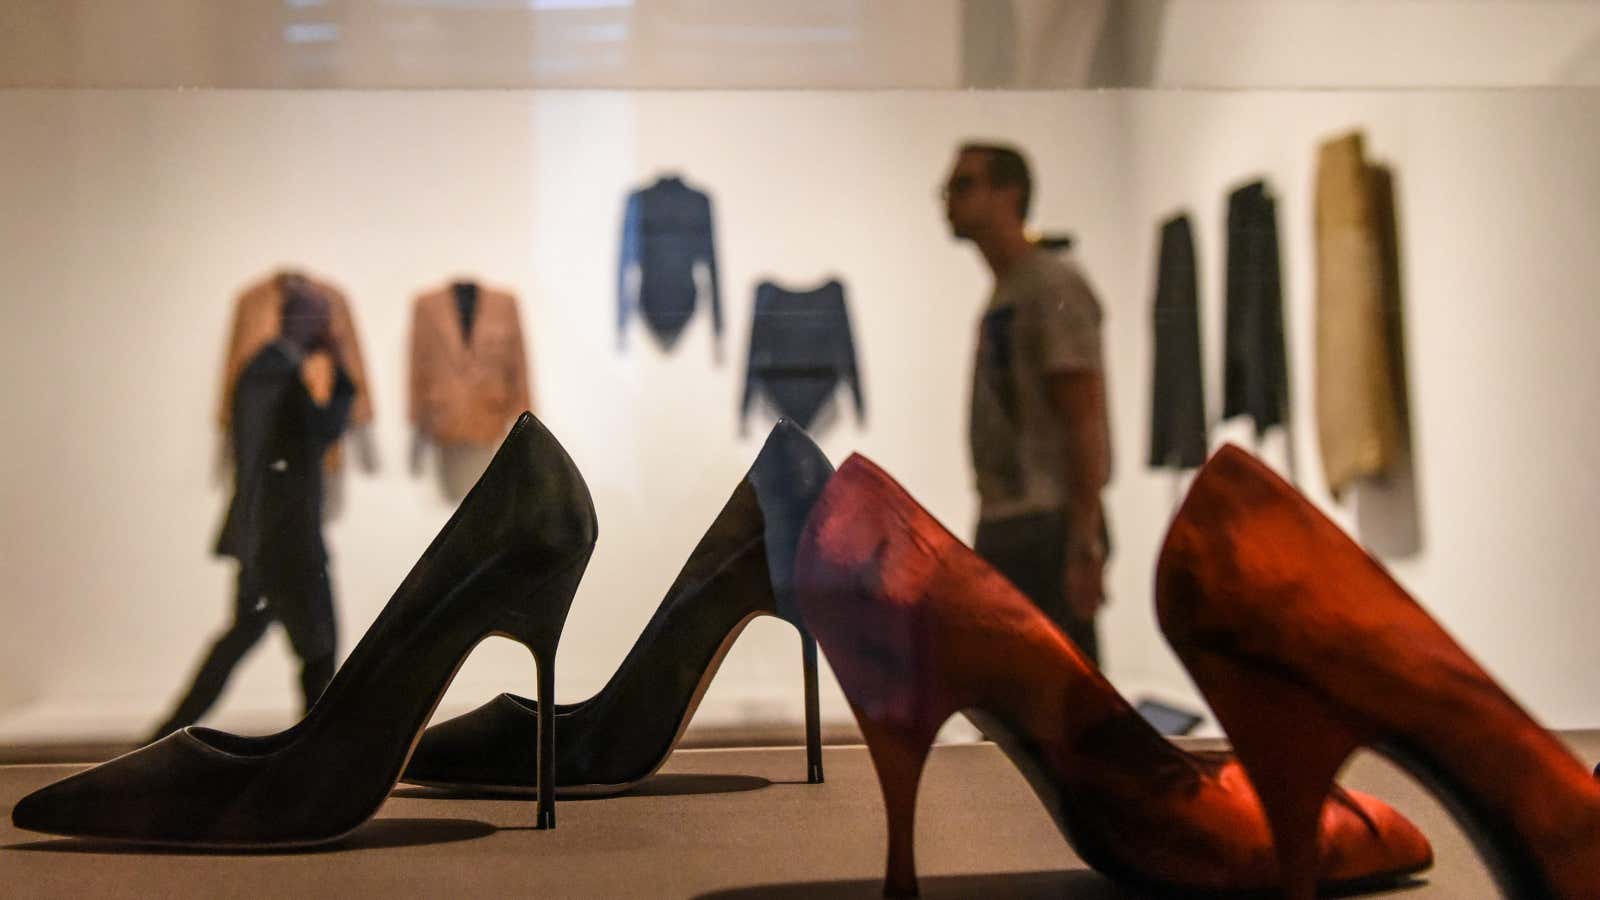 Sales of dress shoes like high heels are growing, but that doesn’t mean they’re back to stay.